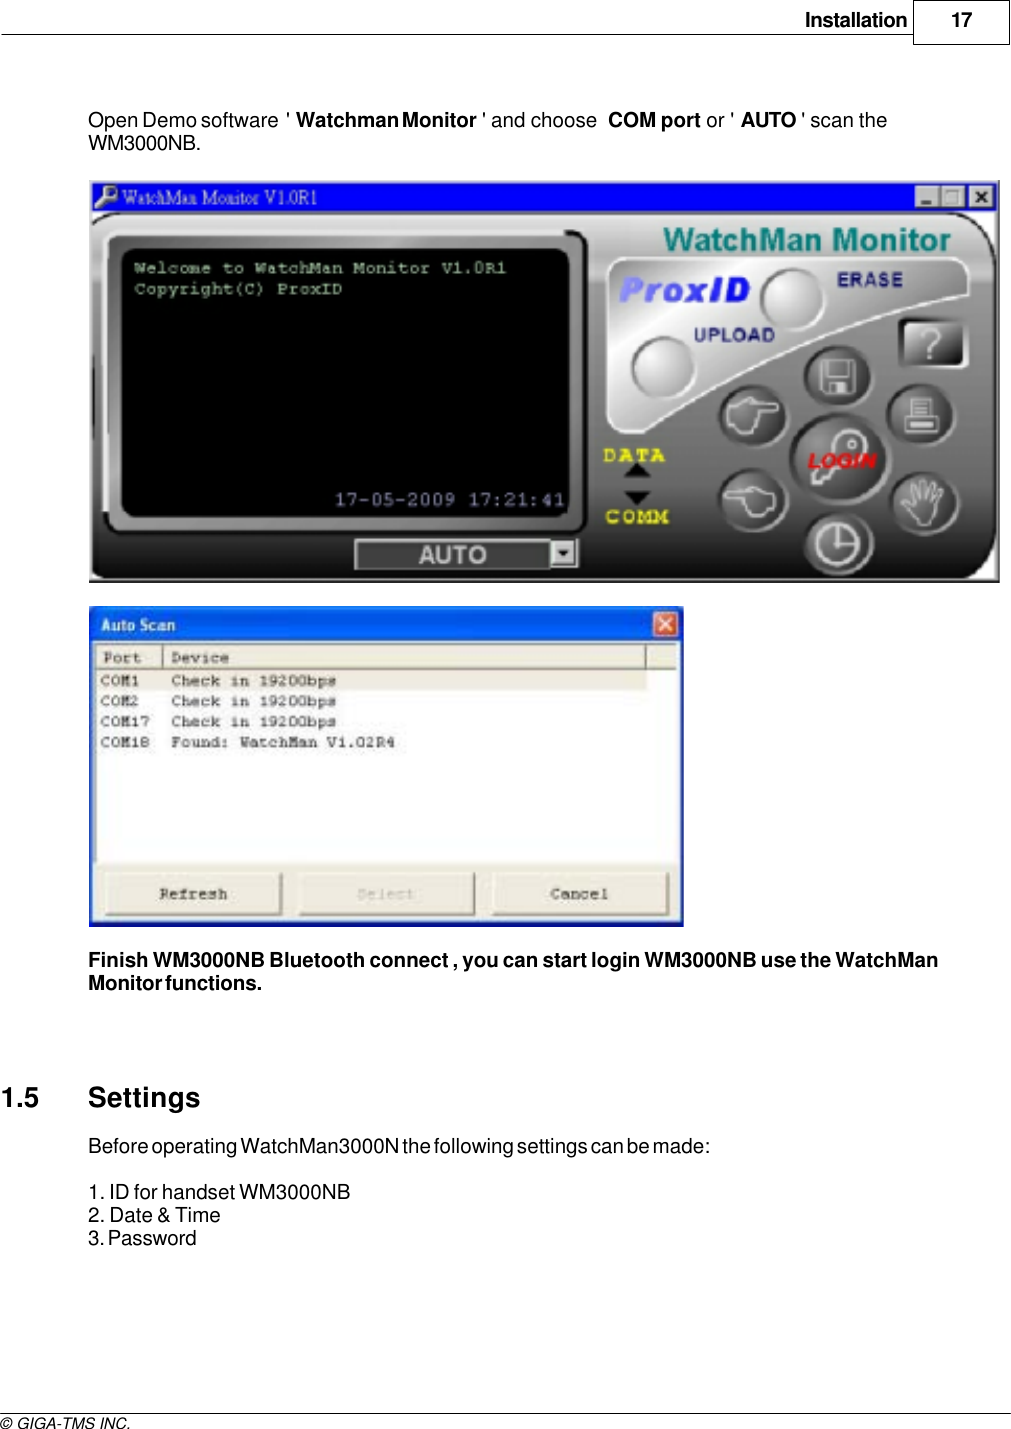 Installation 17© GIGA-TMS INC.Open Demo software  &apos; Watchman Monitor &apos; and choose COM port or &apos; AUTO &apos; scan theWM3000NB.Finish WM3000NB Bluetooth connect , you can start login WM3000NB use the WatchManMonitor functions. 1.5 SettingsBefore operating WatchMan3000N the following settings can be made:1. ID for handset WM3000NB2. Date &amp; Time 3. Password